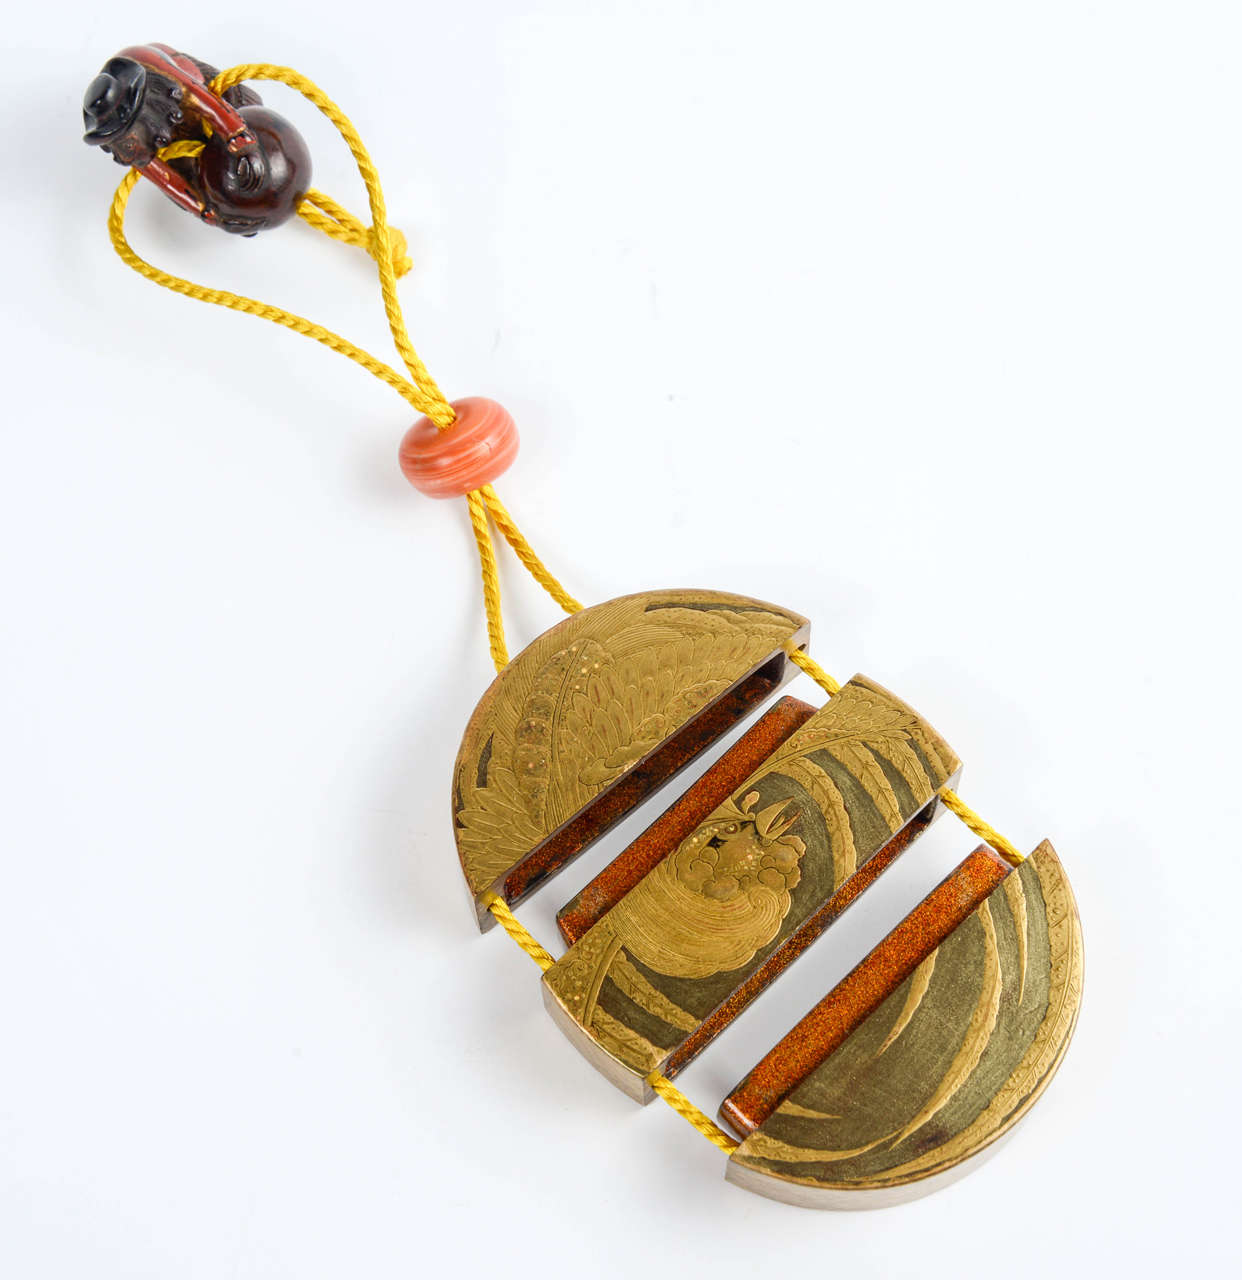 Carved 19th Century Japanese Gold Lacquer Inro with Netsuke (Decorative Pills Box) For Sale